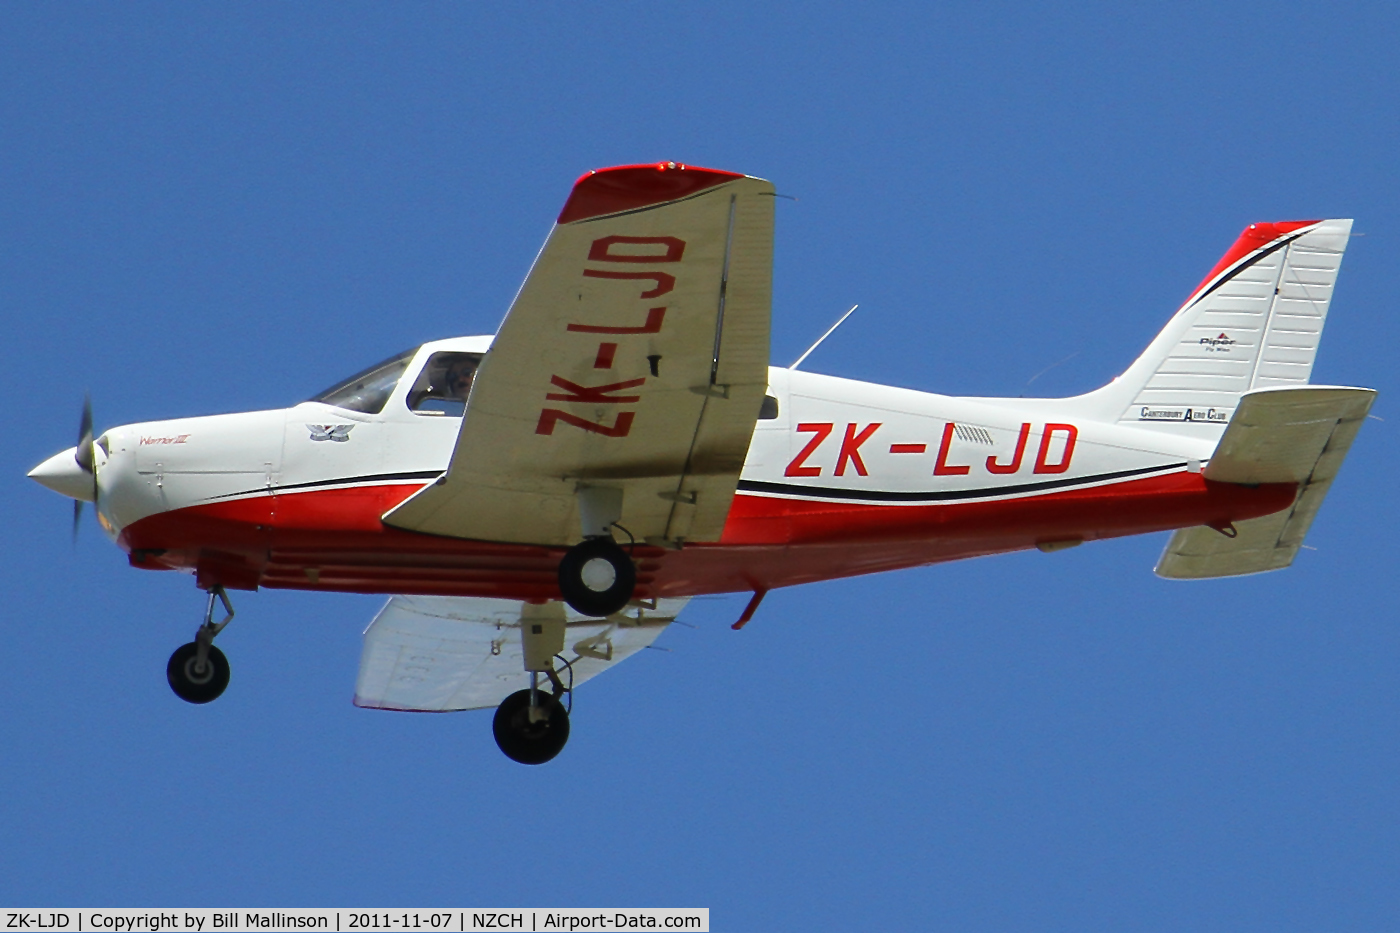 ZK-LJD, 2008 Piper PA-28-161 Cherokee Warrior II C/N 2842308, finals to Grass 02